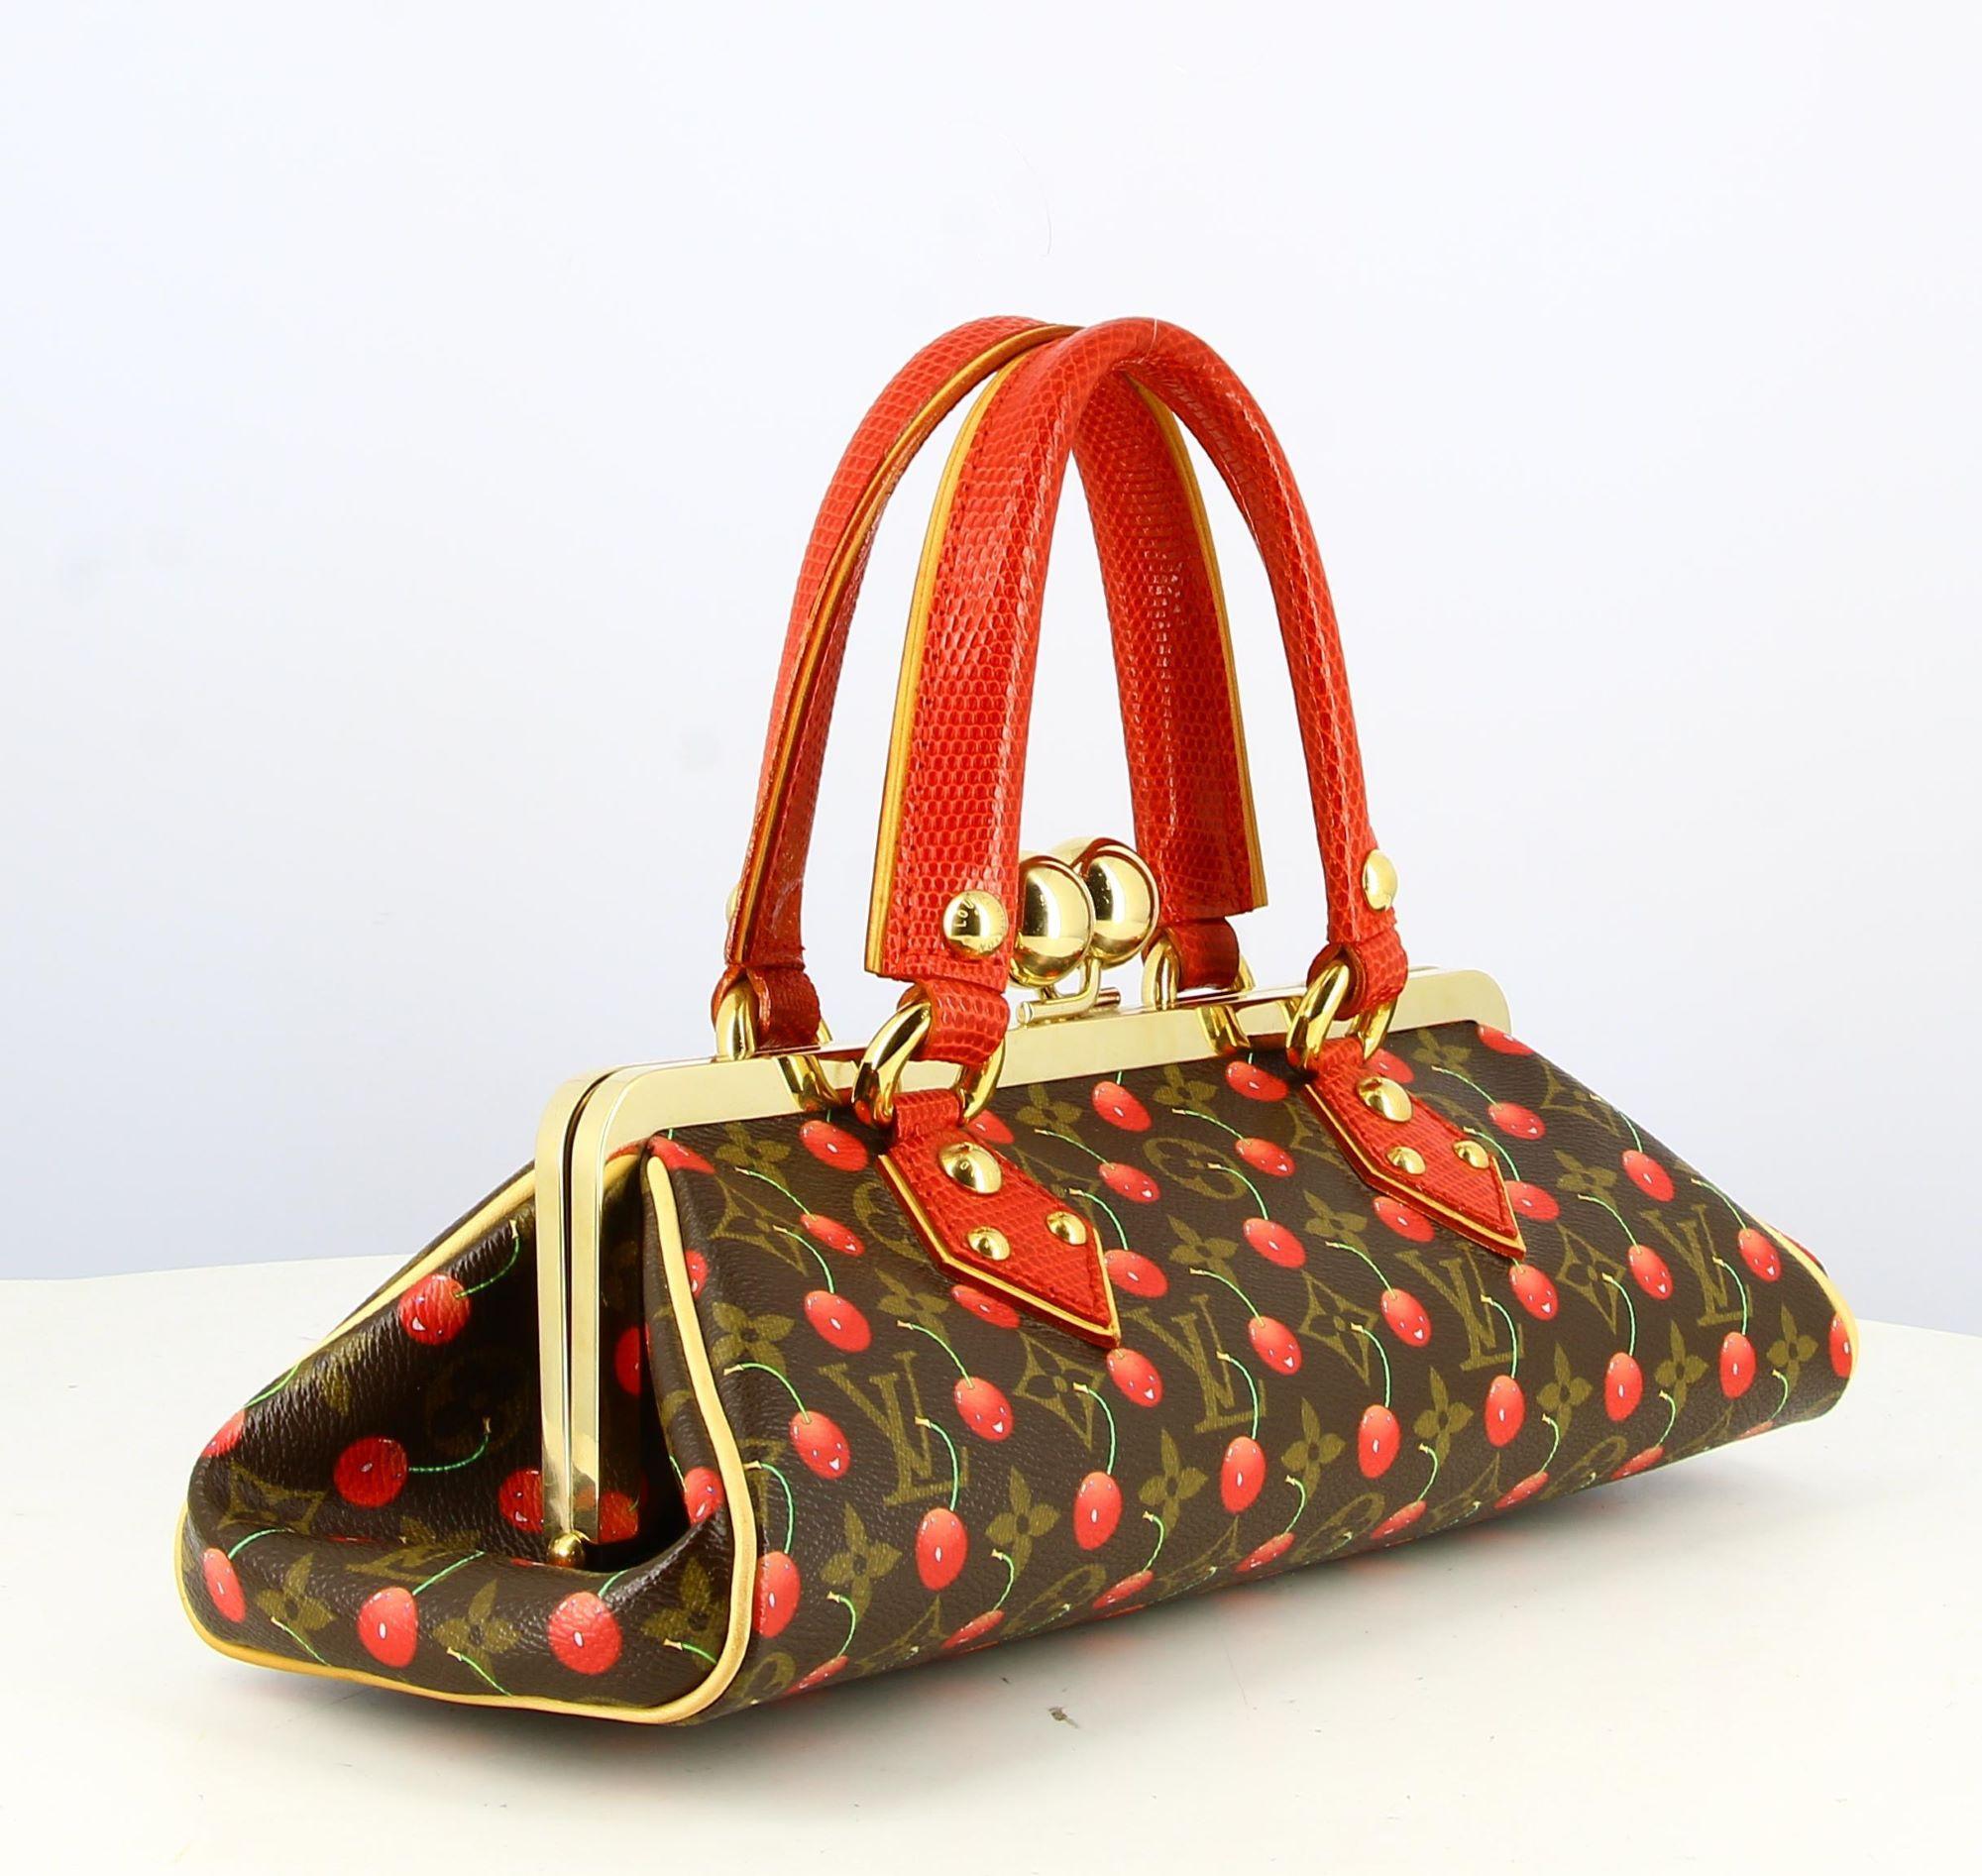 2005 Louis Vuitton Lizard Cherry Monogram Handbag

- Good condition. Shows slight signs of wear over time
- Louis Vuitton cherry monogram handbag
- Small red crocodile leather strap
- Golden clasp
- Inside: red suede + small pocket
- Packaging :